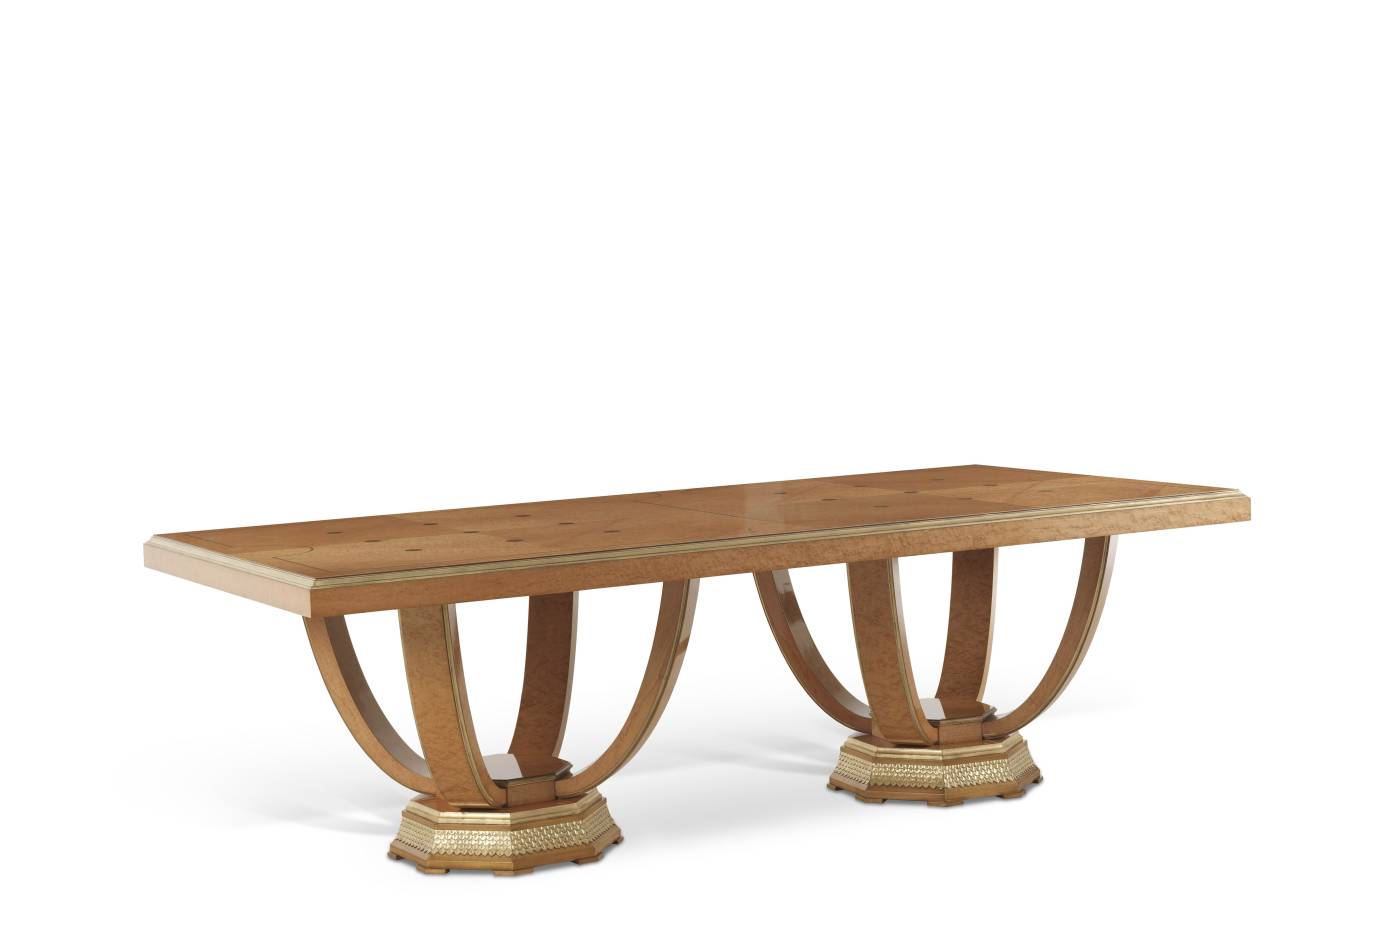 PLEASURE dining table – Transform your space with luxury Made in Italy classic dining tables of Savoir-Faire collection.